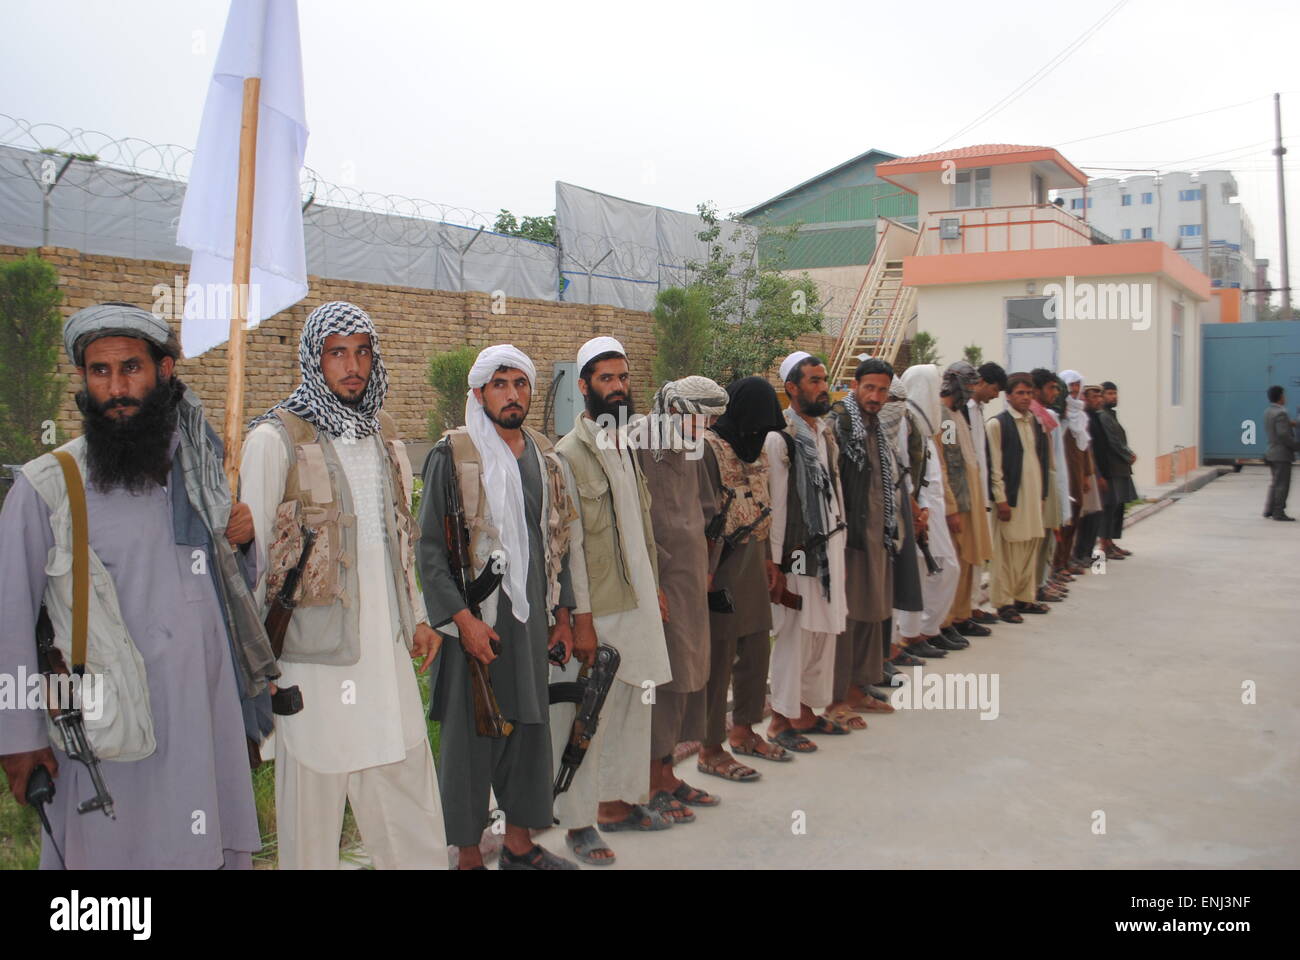 Kunduz, Afghanistan. 6th May, 2015. Taliban fighters attend a surrender ceremony held in Kunduz province, northern Afghanistan, May 6, 2015. A total of 190 Taliban militants have been killed over the past 13 days of heavy fighting in Kunduz province with Kunduz city as its capital, 250 km north of Kabul, while 23 others laid down arms and surrendered on Wednesday, provincial governor Mohammad Omar Safi said. © Ajmal/Xinhua/Alamy Live News Stock Photo